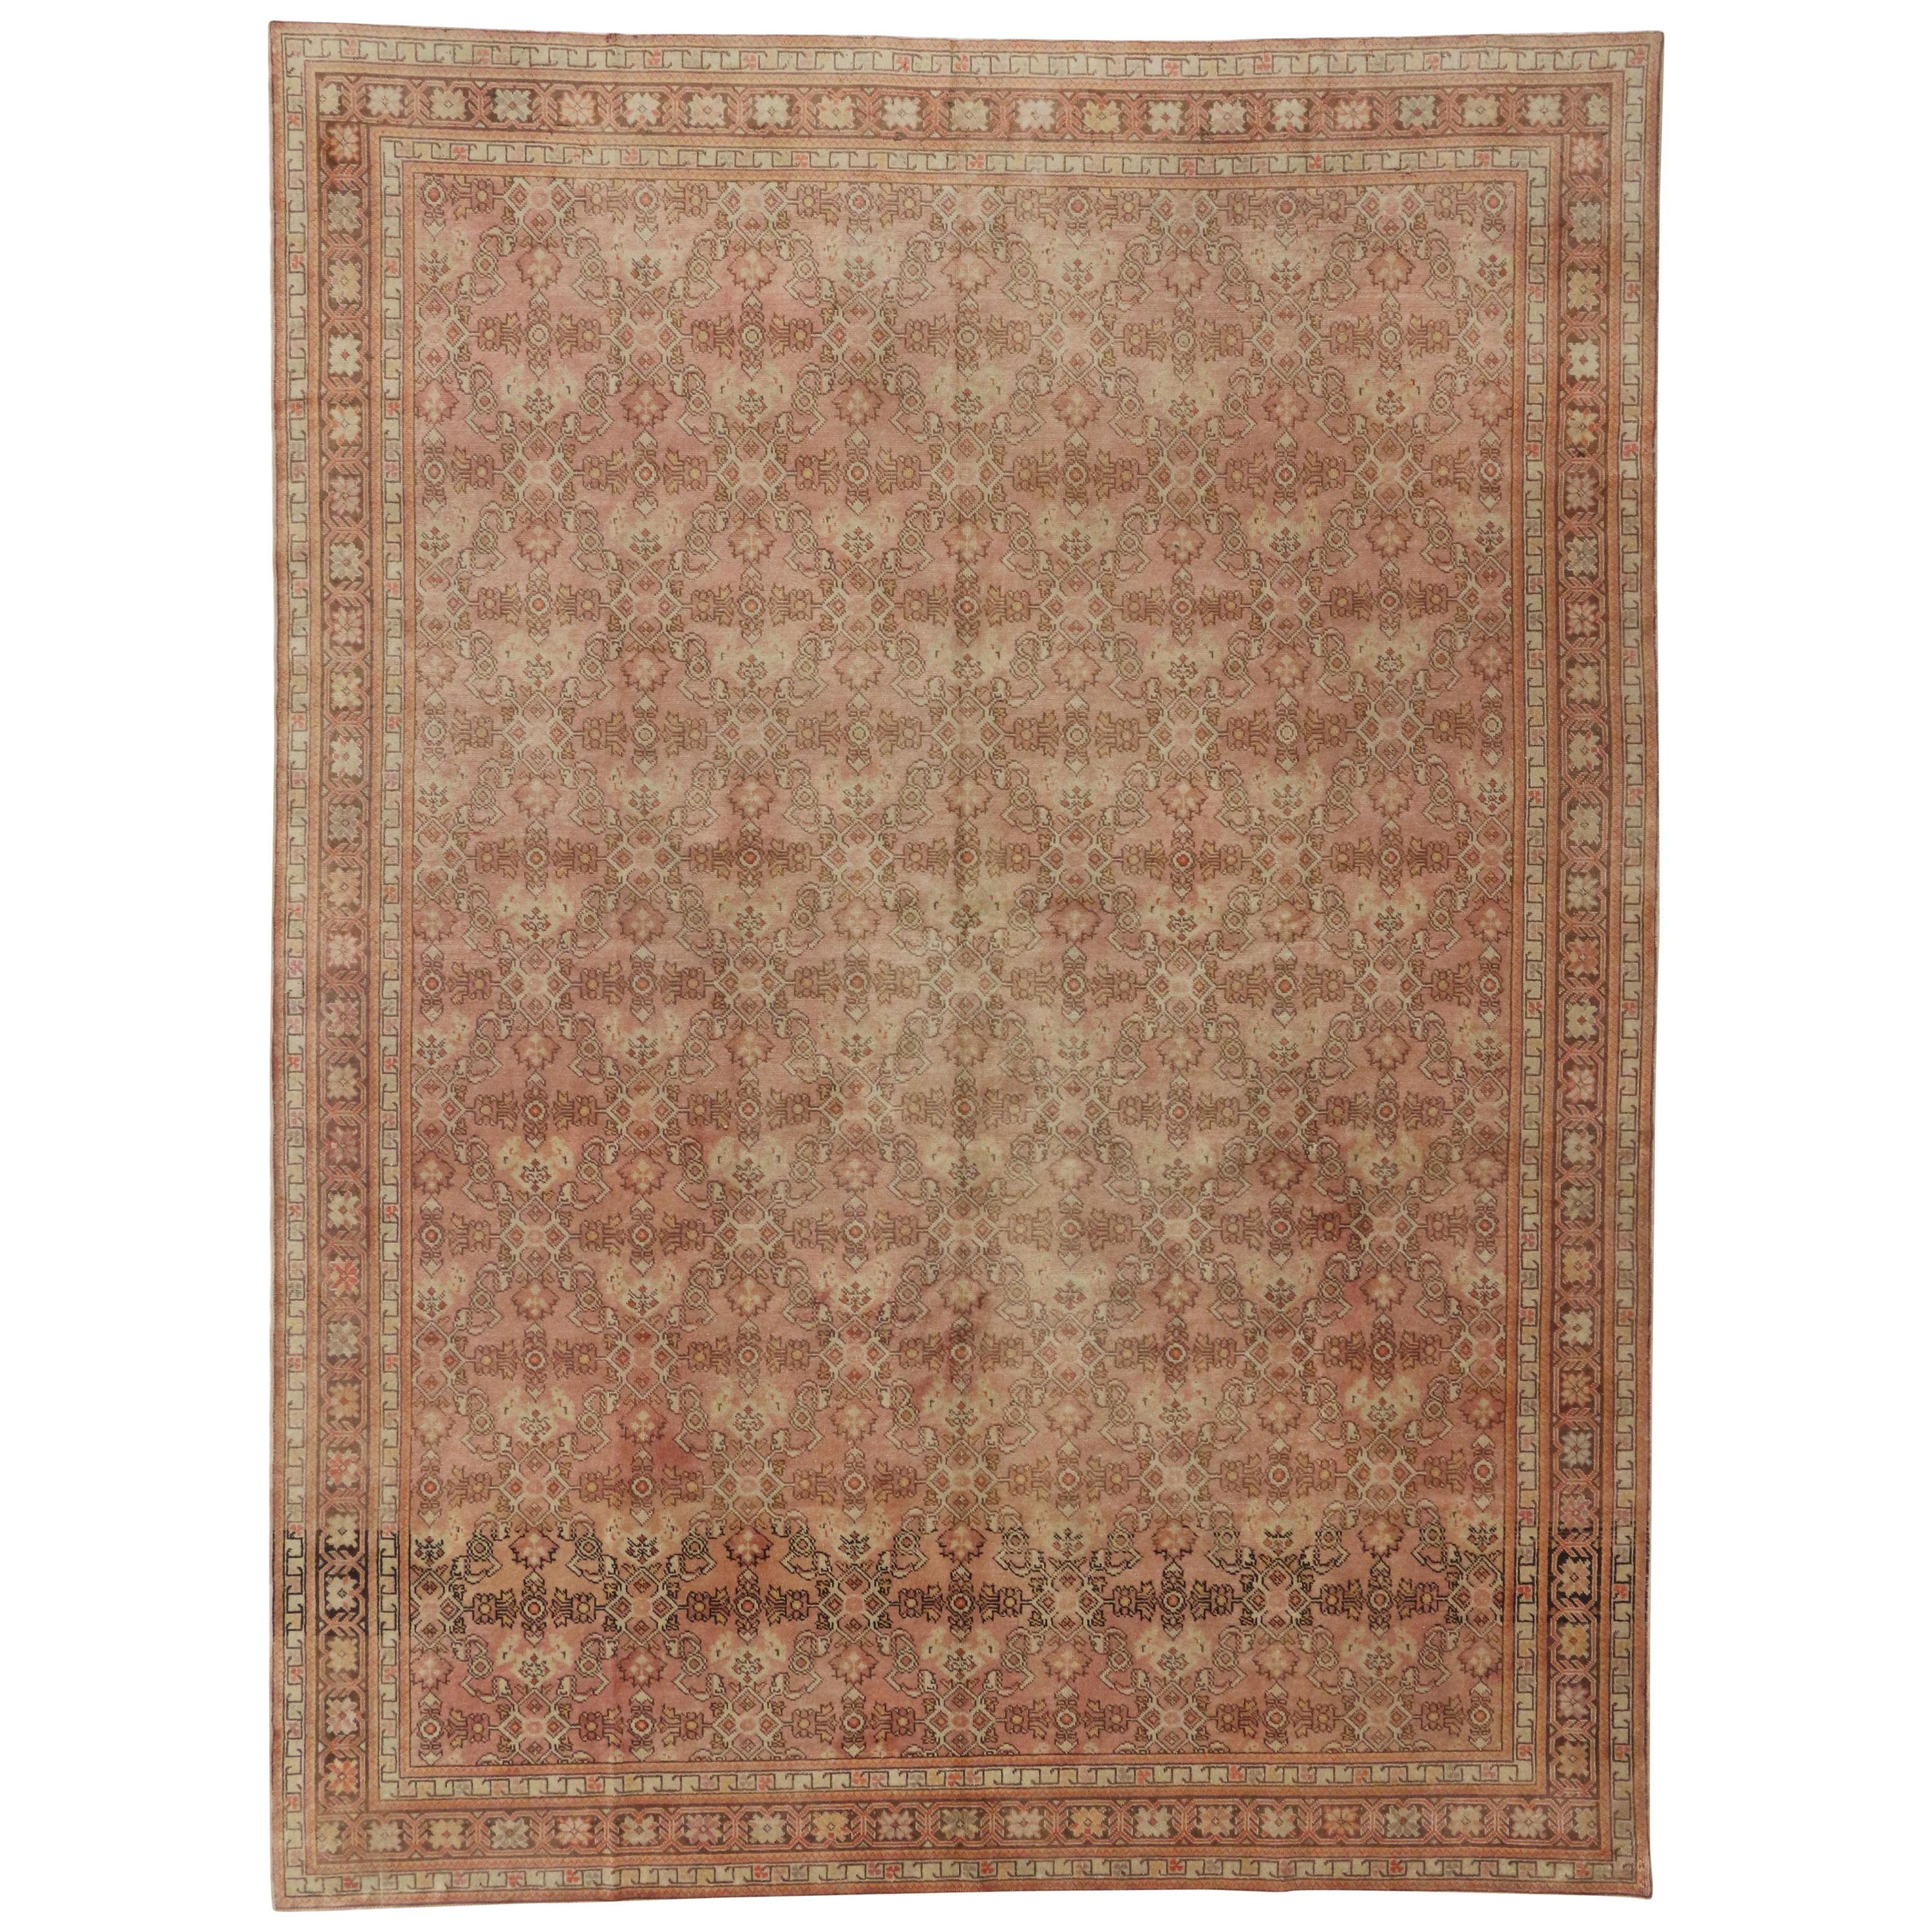 Vintage Turkish Oushak Area Rug with French Provincial Style